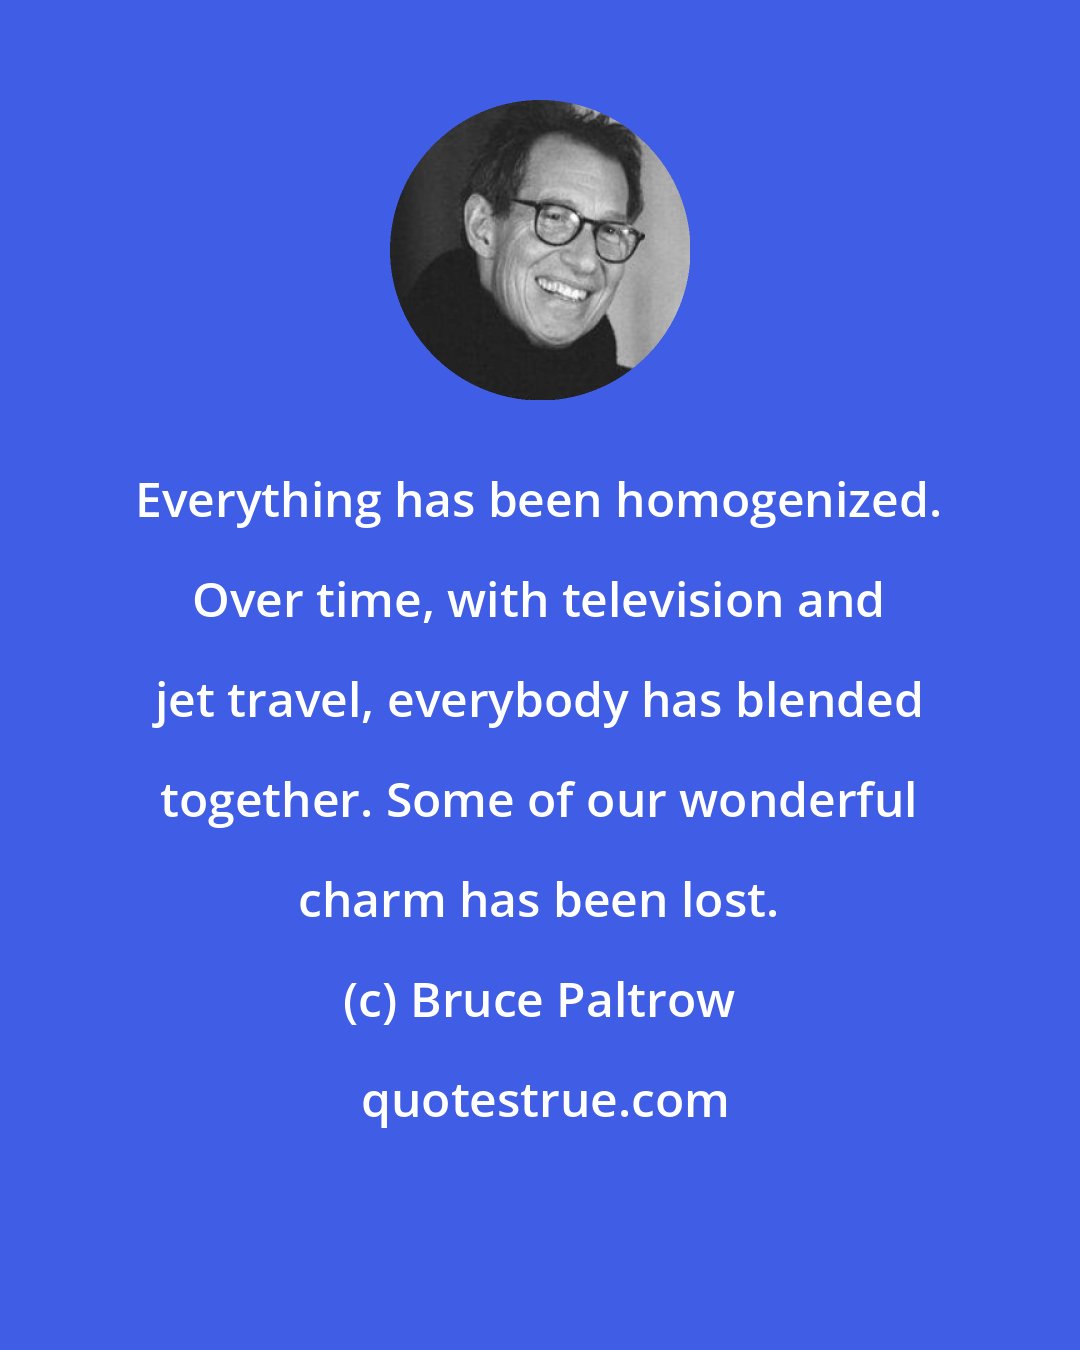 Bruce Paltrow: Everything has been homogenized. Over time, with television and jet travel, everybody has blended together. Some of our wonderful charm has been lost.